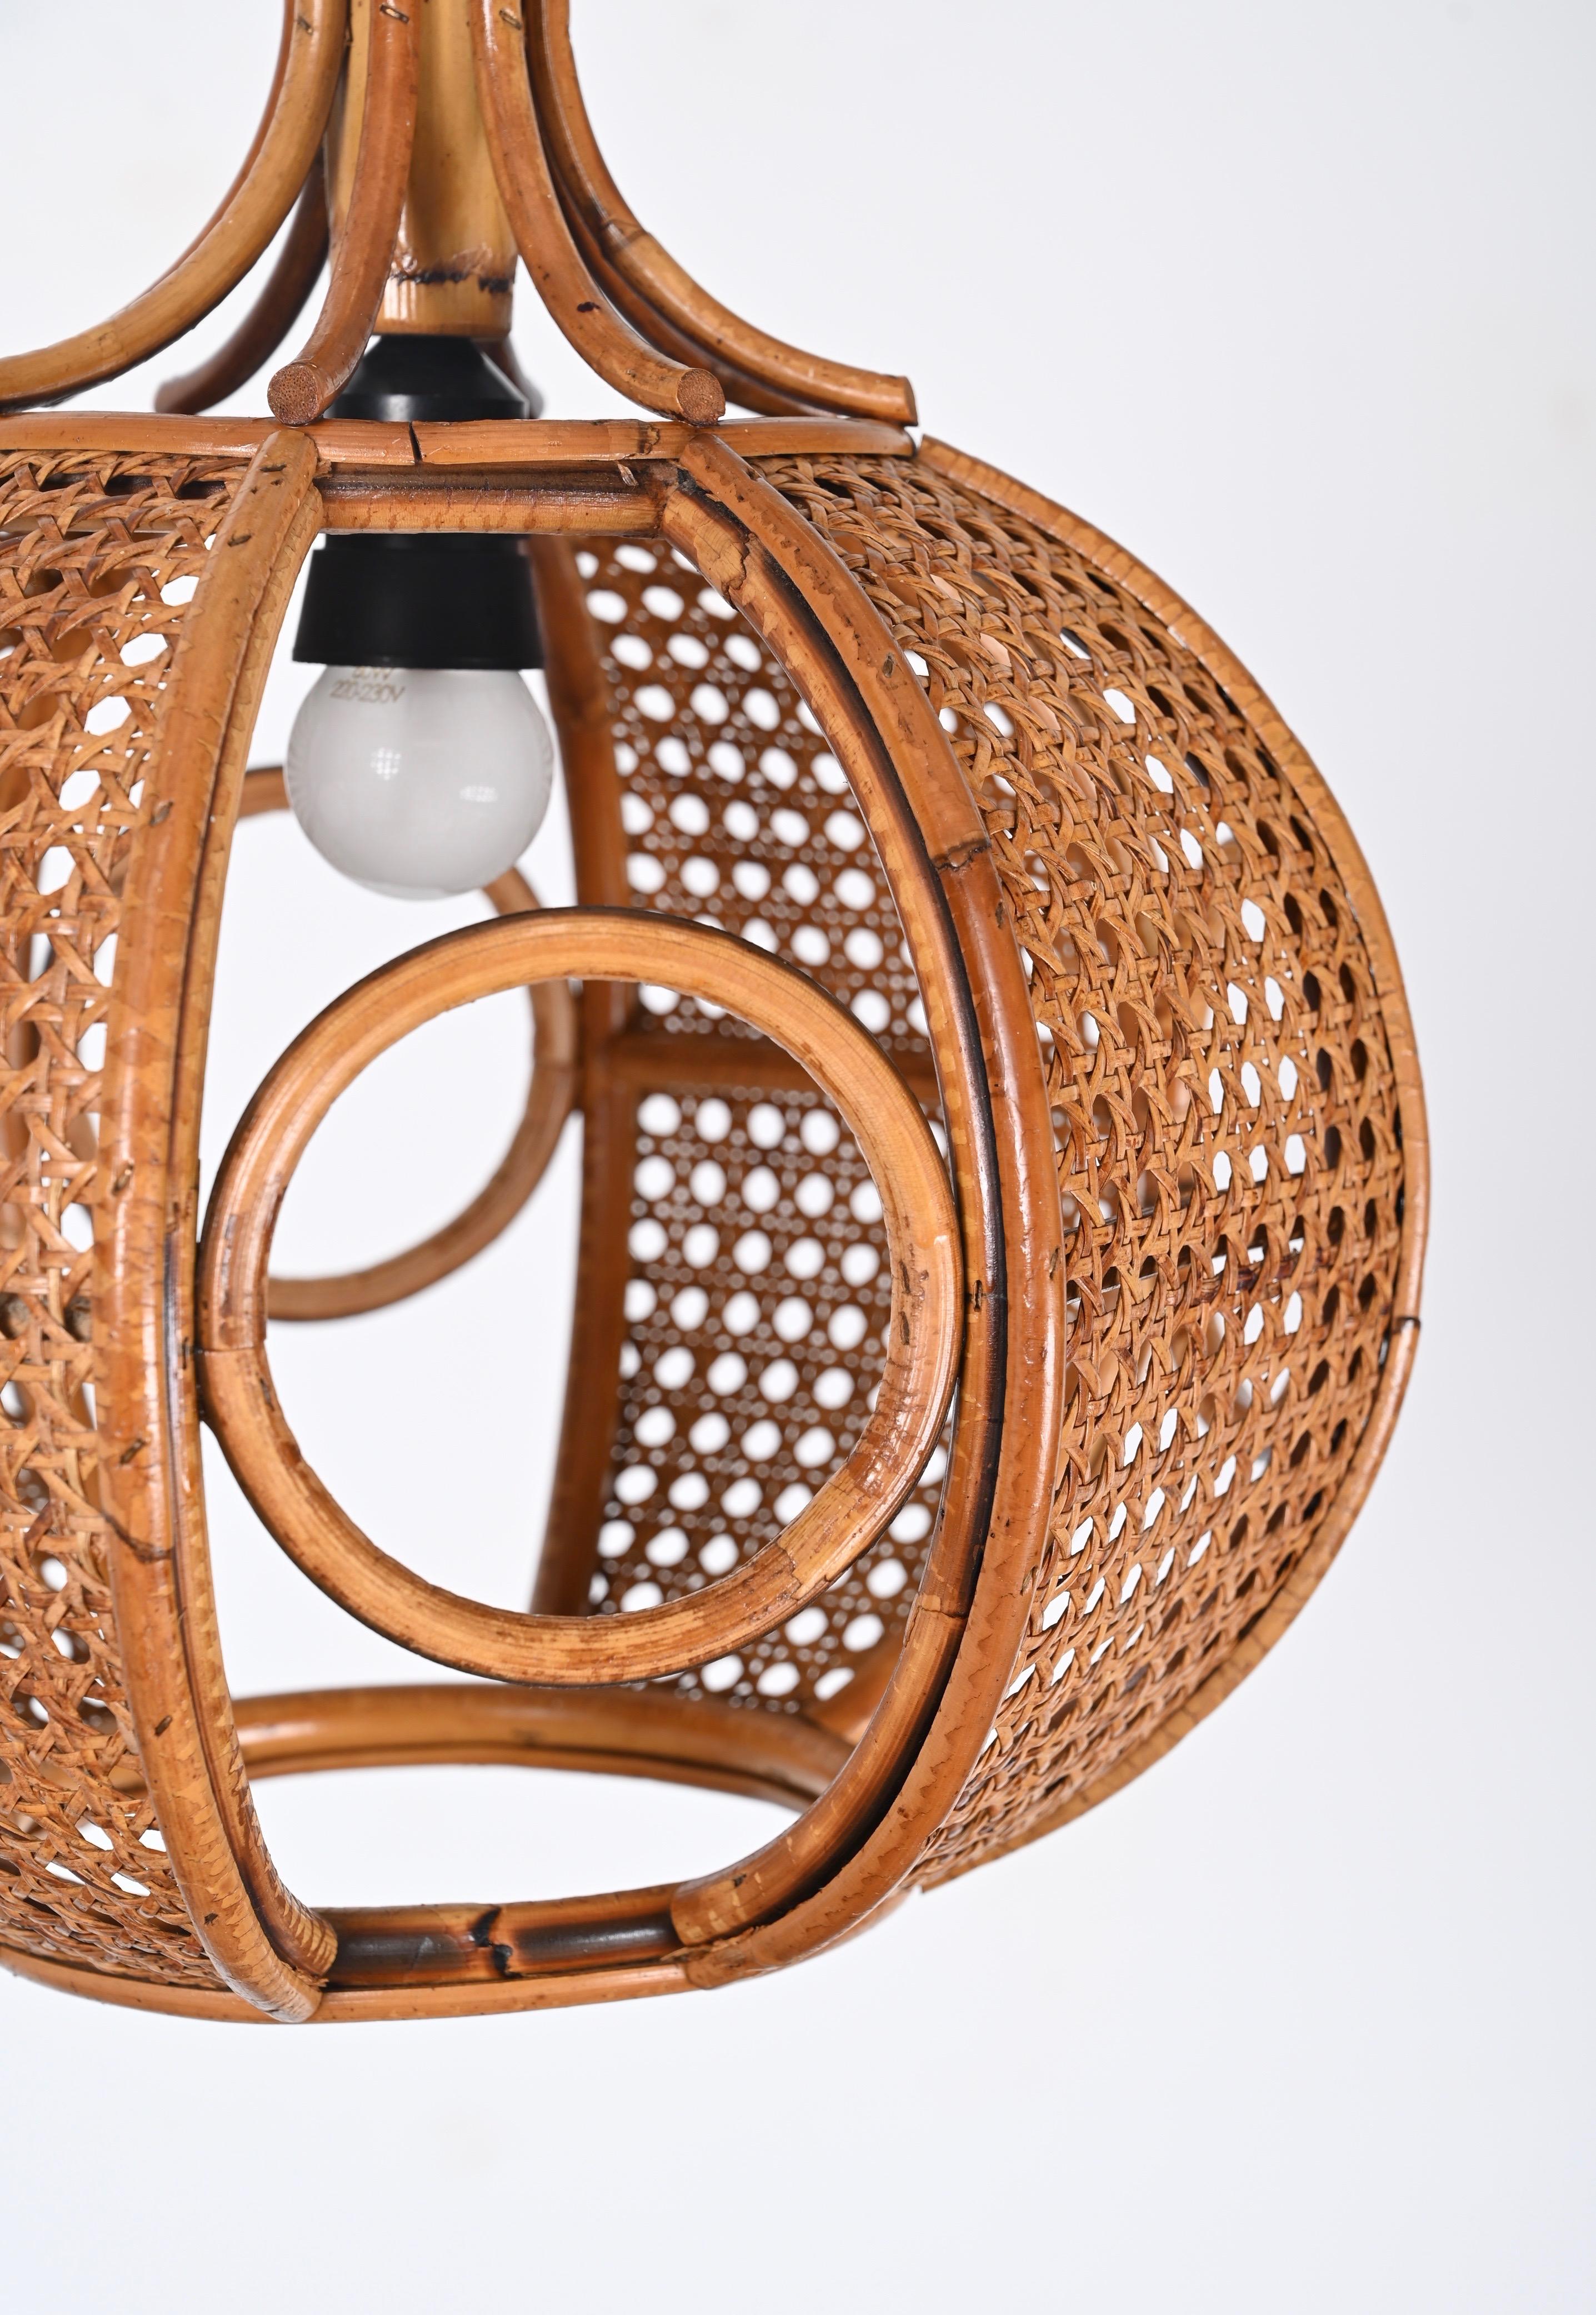 Midcentury French Riviera Chapel Rattan and Wicker Italian Chandelier, 1960s For Sale 3